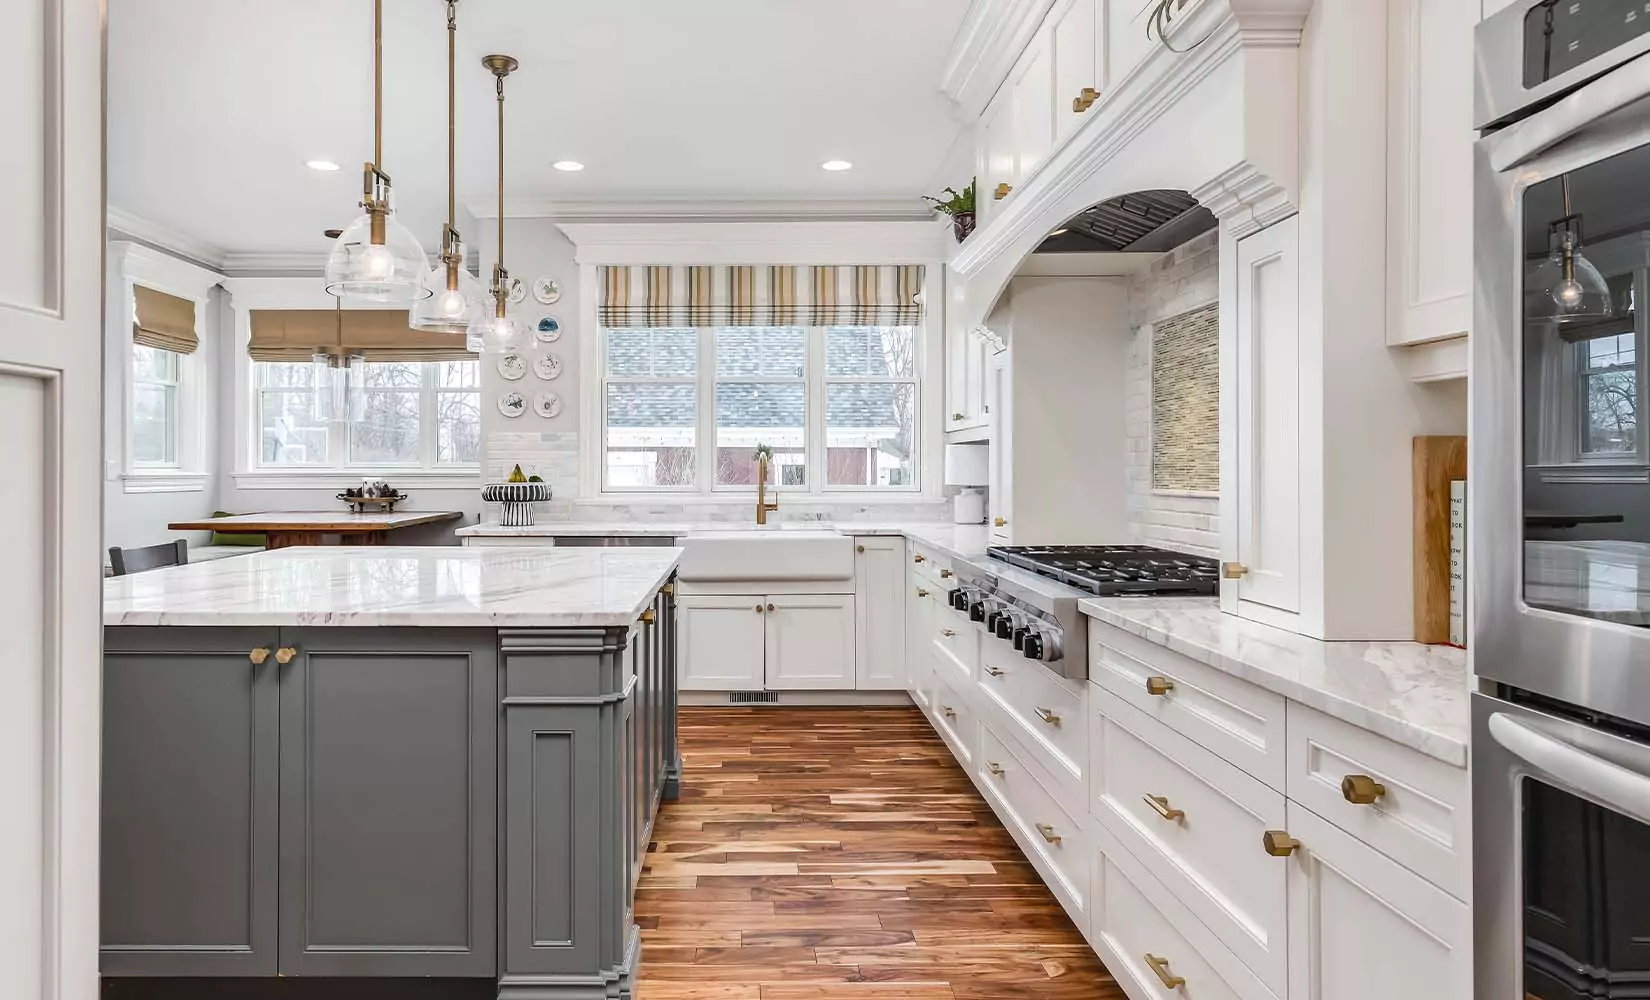 Farmhouse kitchen with gray kitchen island and white surrounding cabinets.